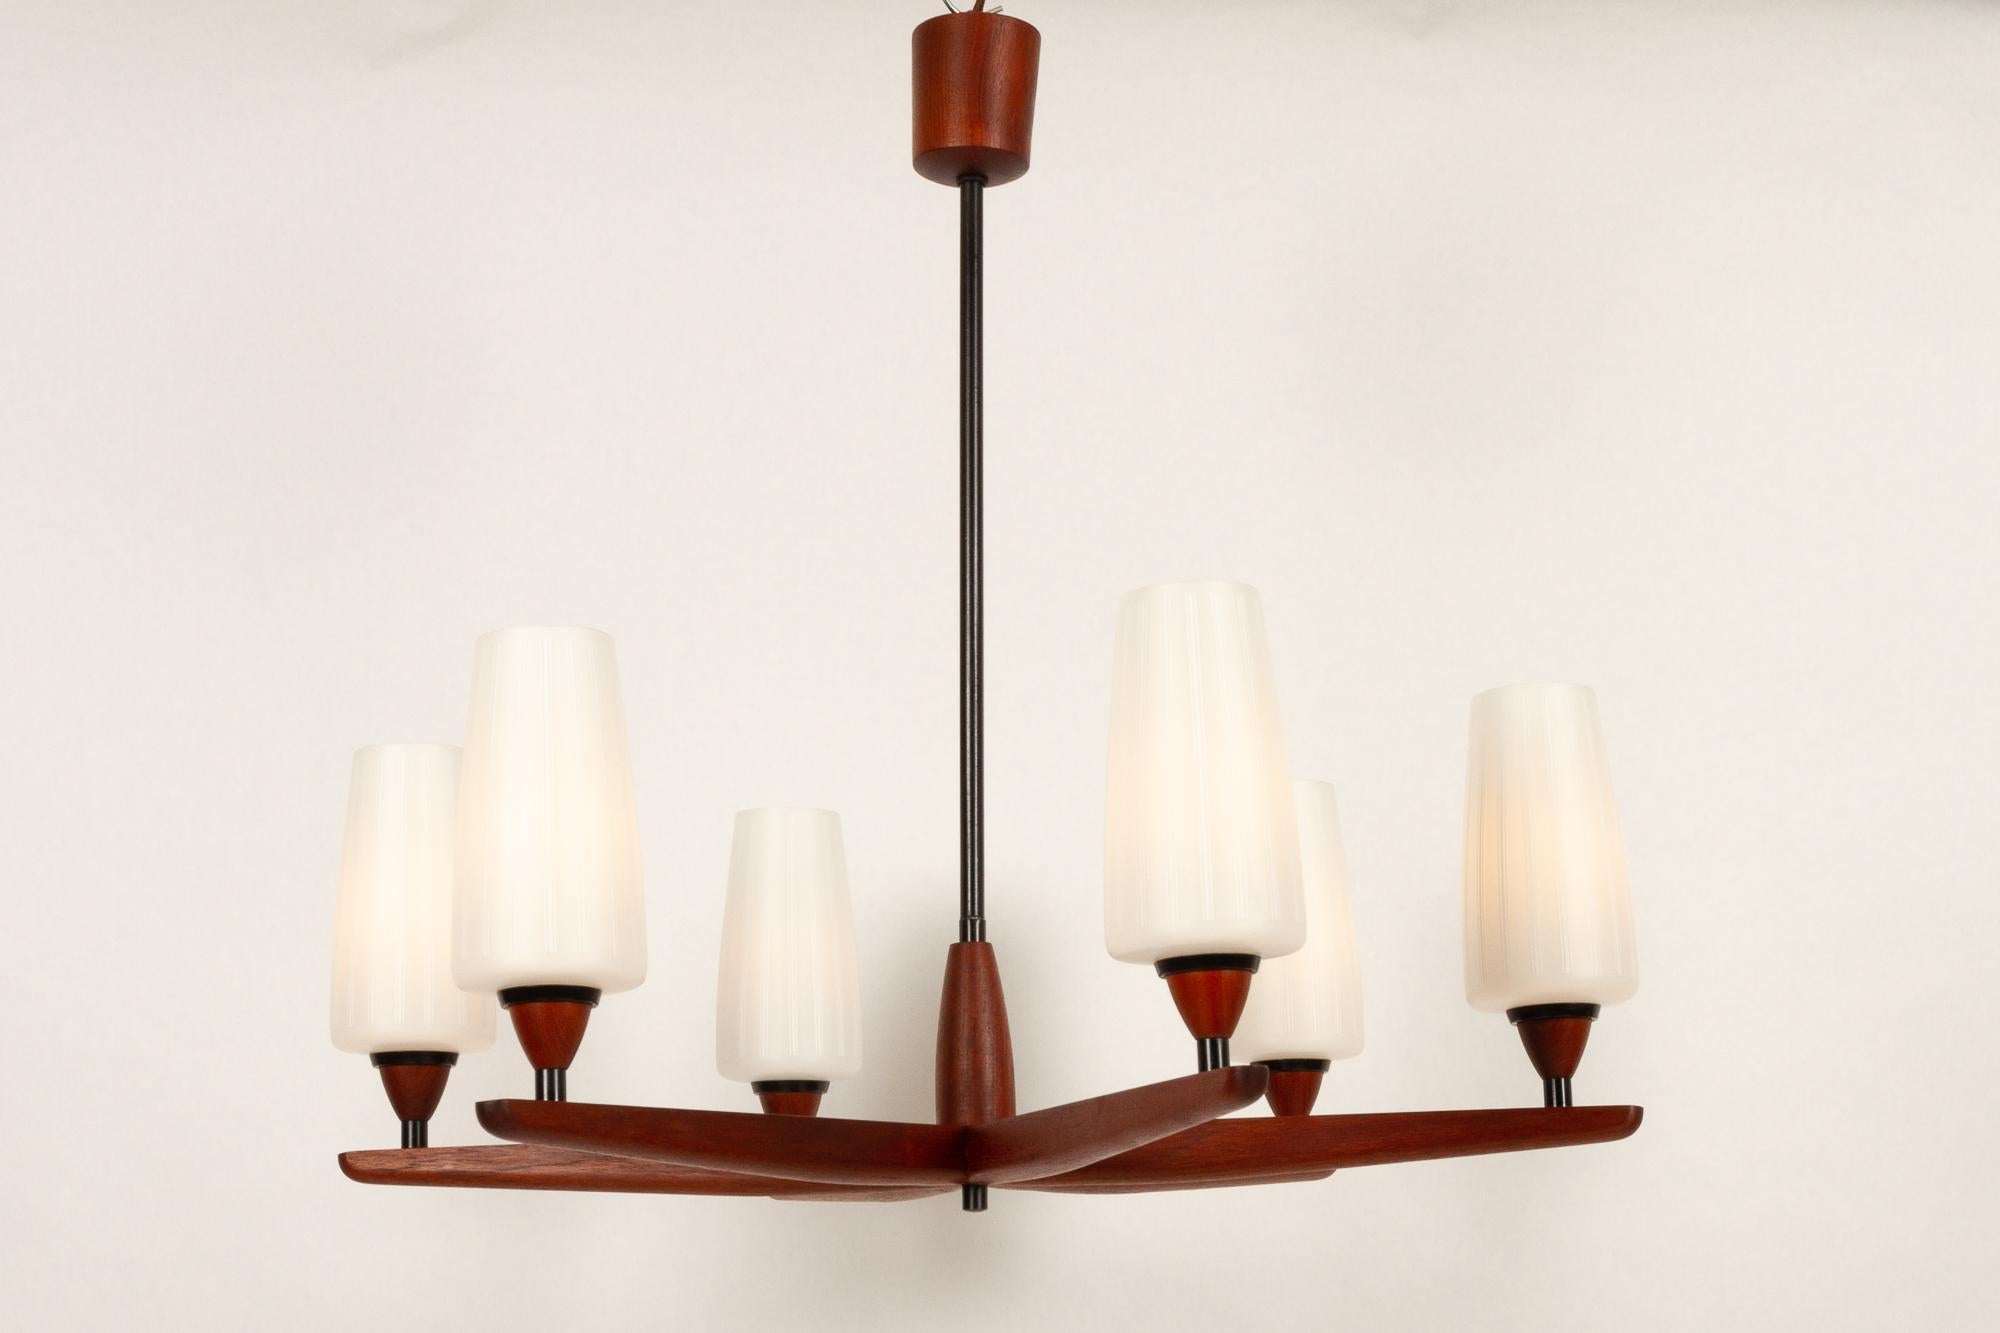 Scandinavian Modern 8-arm teak chandelier, 1950s.
Large Mid-Century Modern chandelier in solid teak with eight arms. Shades in frosted opaline glass with etched decorations. Emits a soft warm light. Possible to turn on either four or all eight